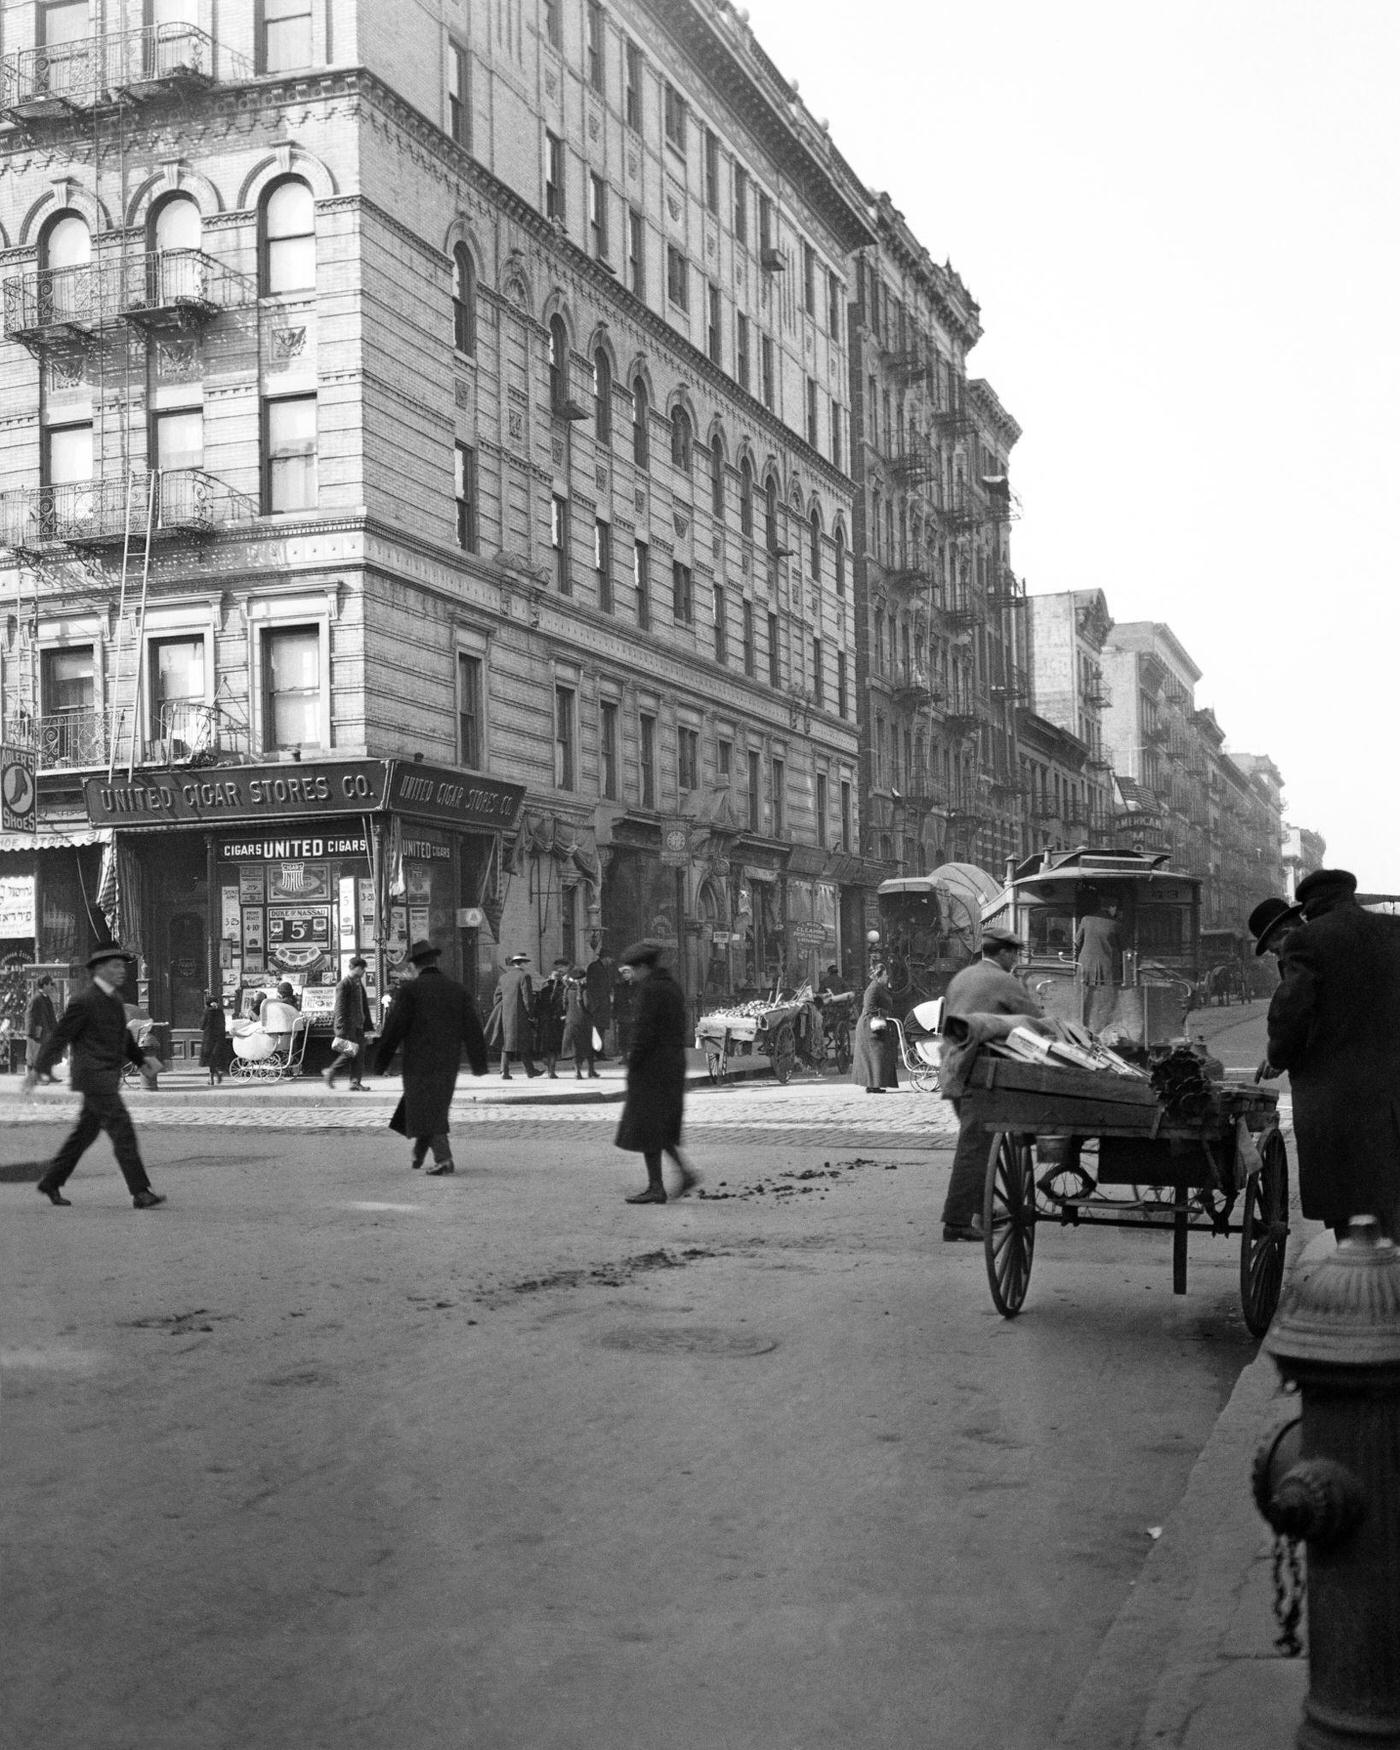 Block Of First Ave And 3Rd Street, Population Of 5021 In 1910 Census, Lower East Side Of Manhattan, 1915